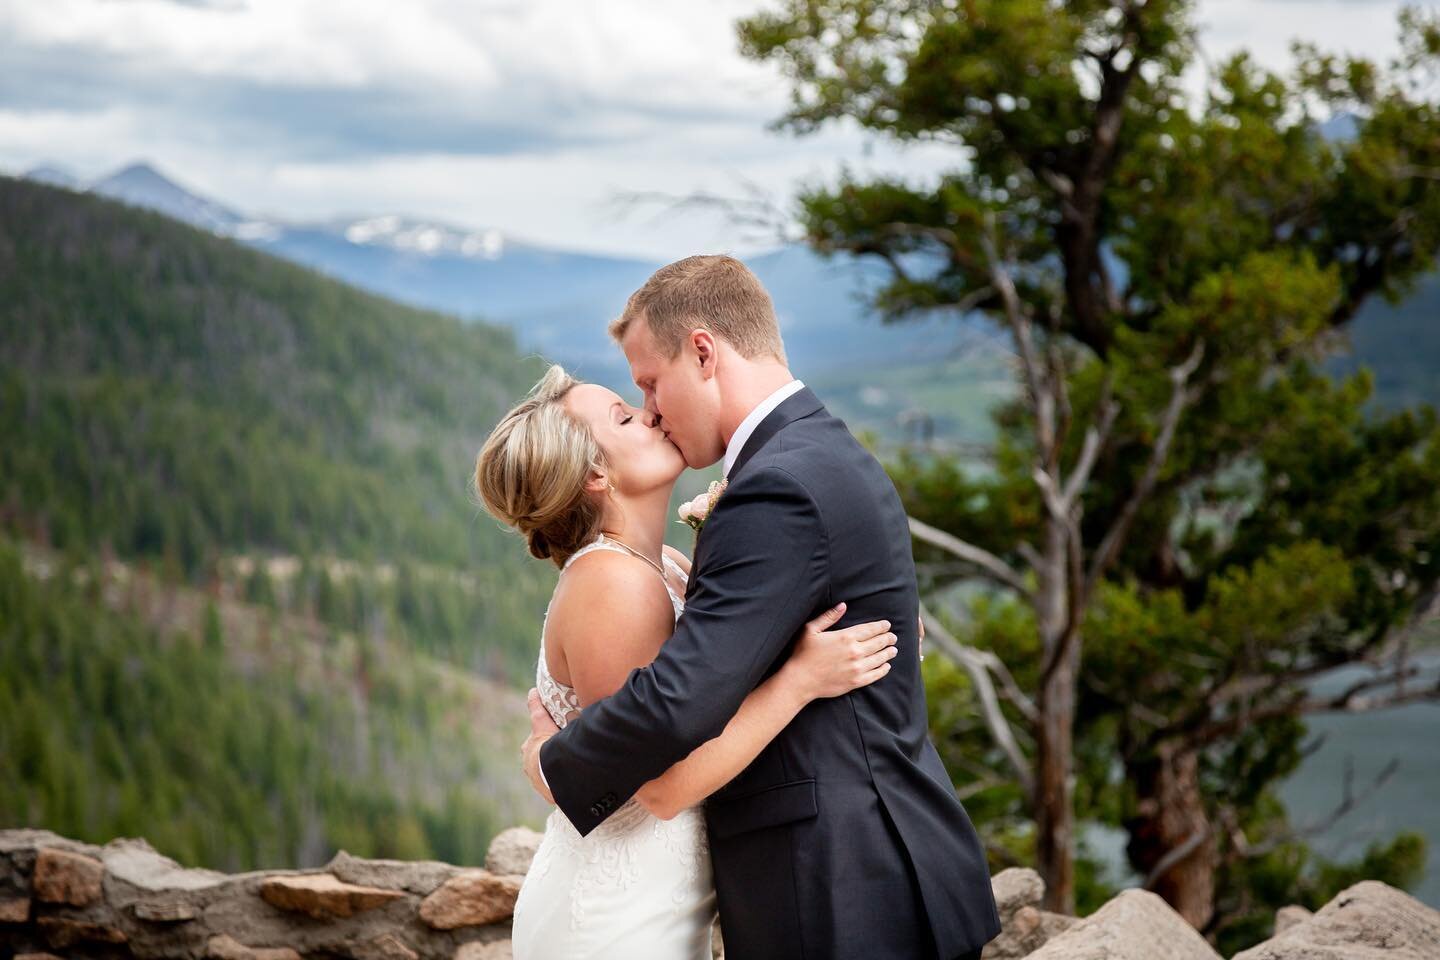 I always love the moment of the first kiss. There is so much joy and excitement. 
*fun fact I was disappointed in Our first kiss at our wedding. The anticipation had built and the officiant told me to kiss Nick - instead of having Nick kiss me or for